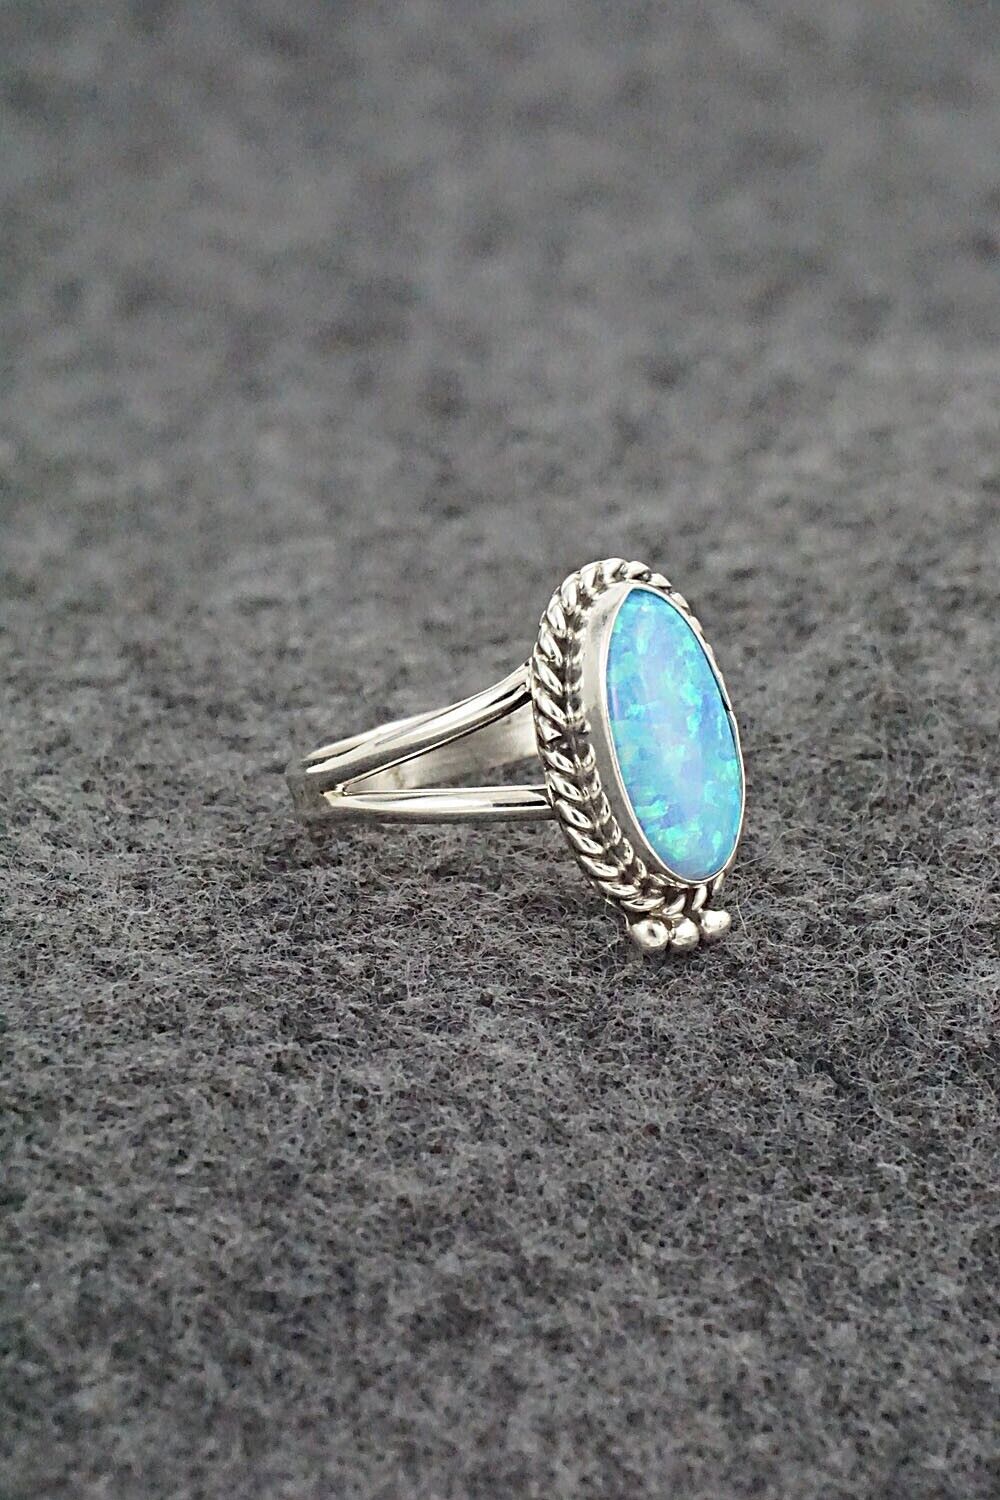 Opalite & Sterling Silver Ring - Jan Mariano - Size 5.5